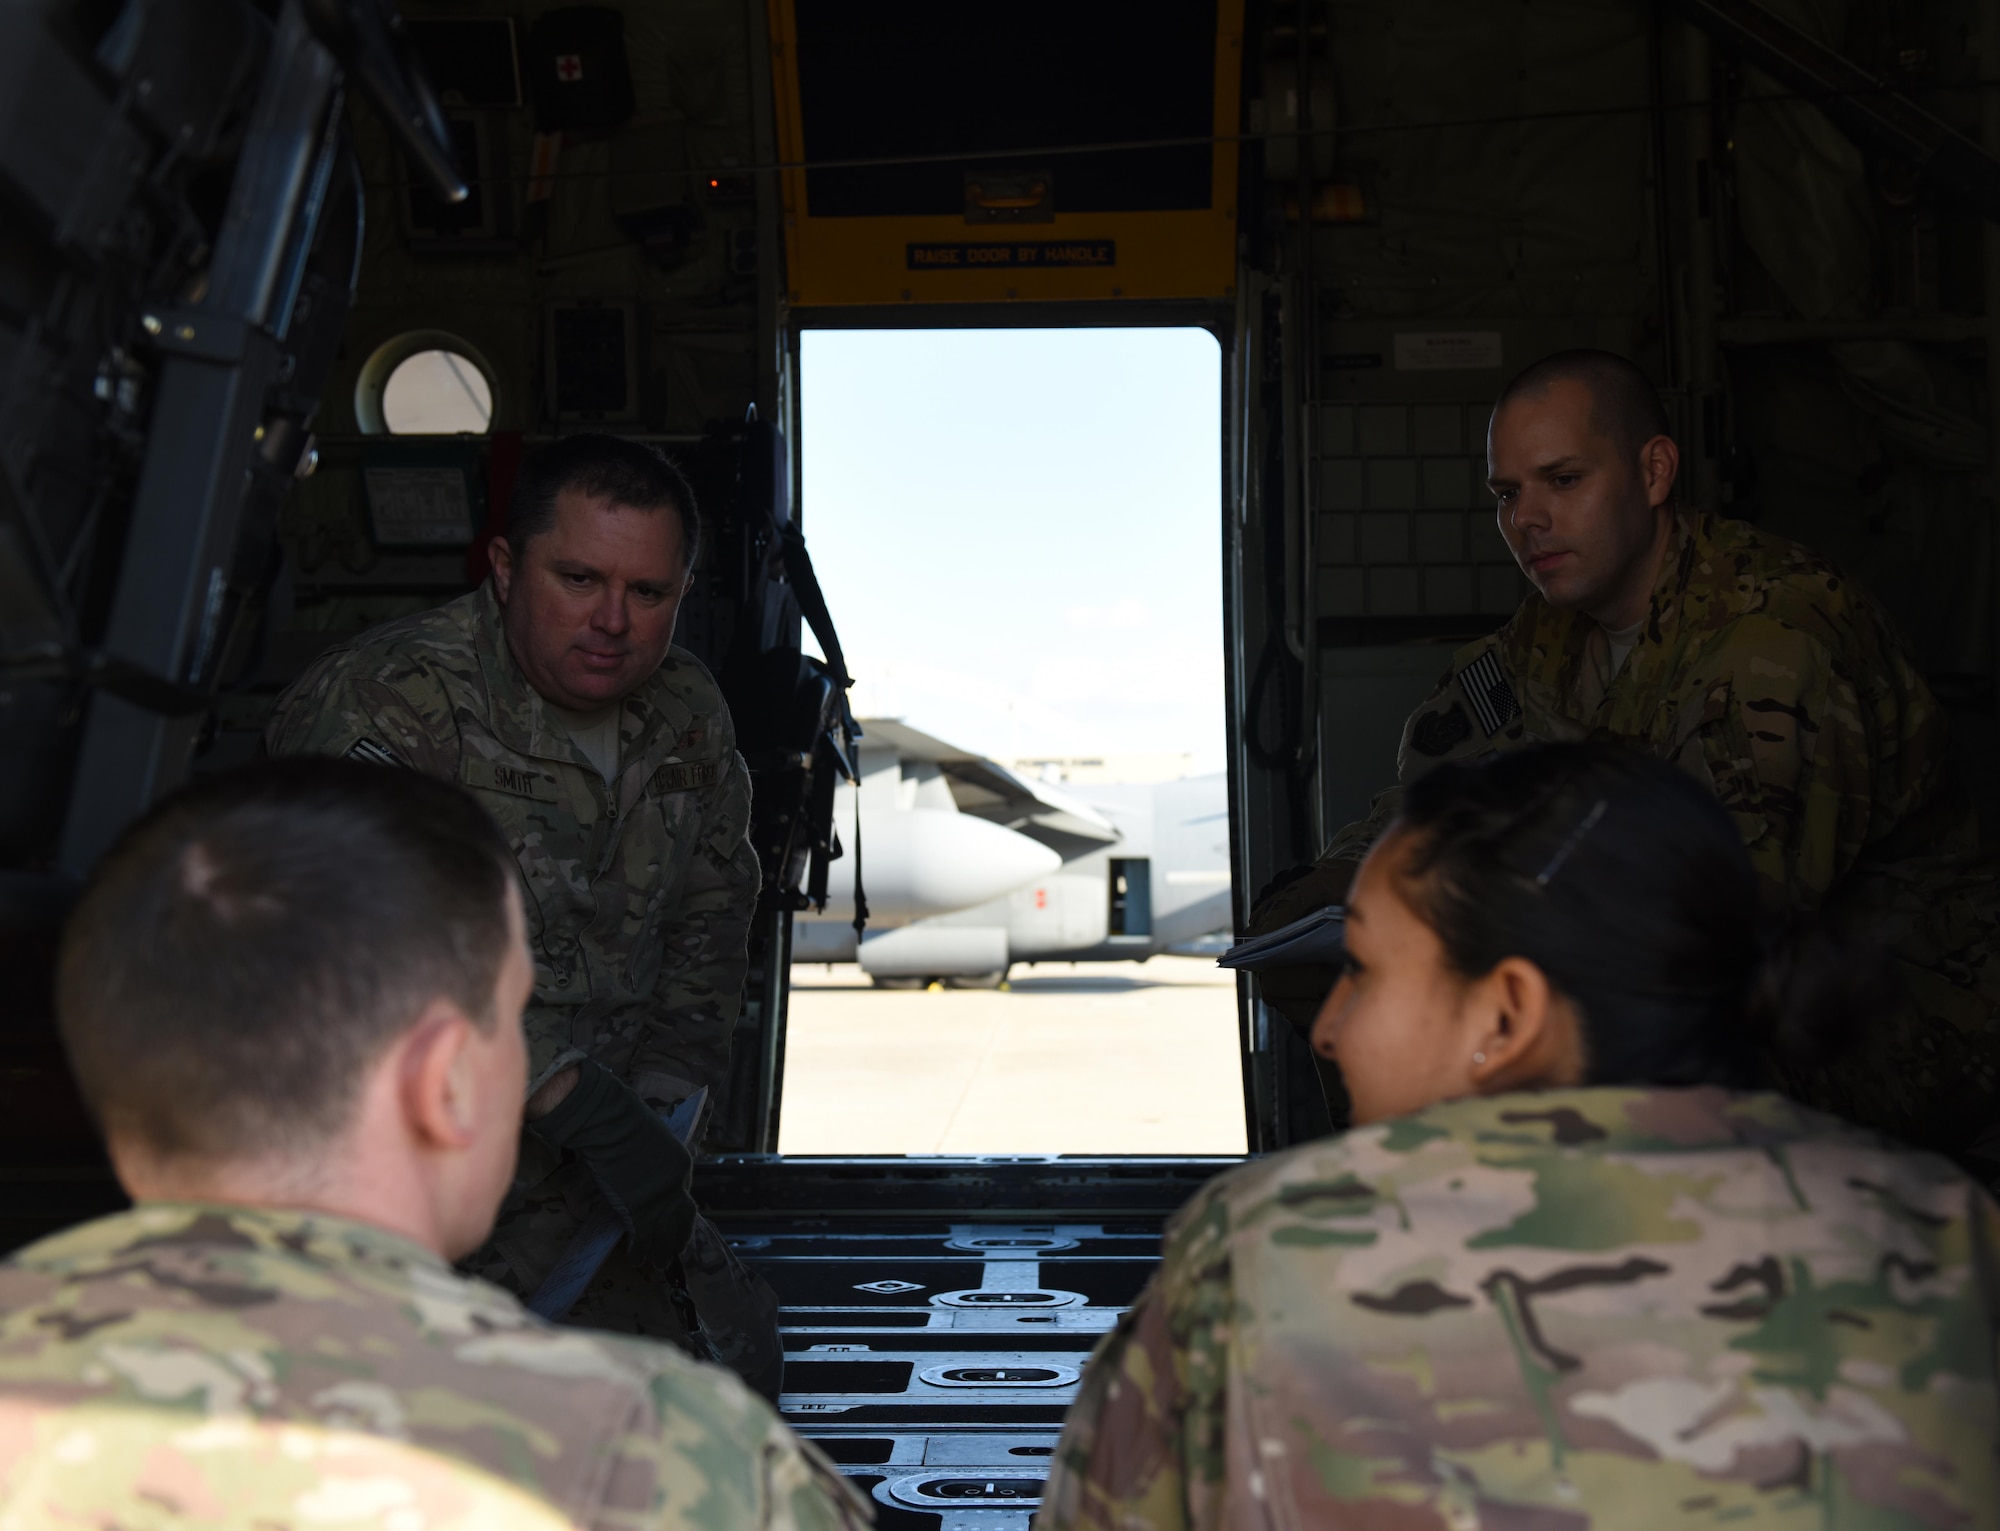 Loadmasters from the 193rd Special Operations Squadron conduct canary slide training